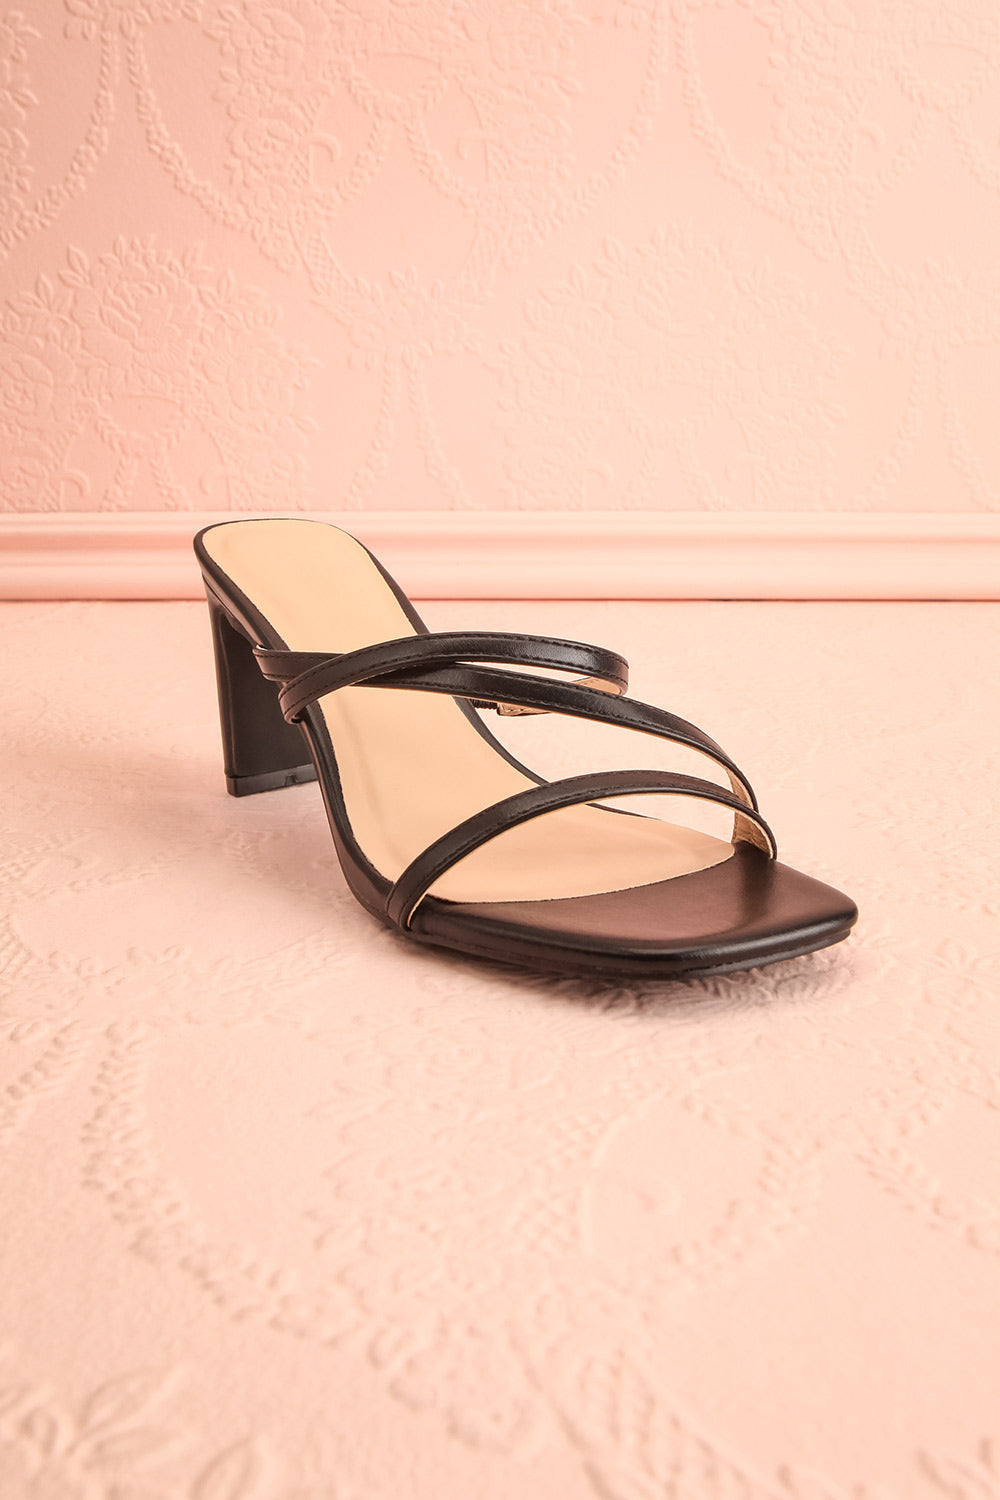 Baobab Black Strappy Mid Heel Sandals | Boutique 1861 front view